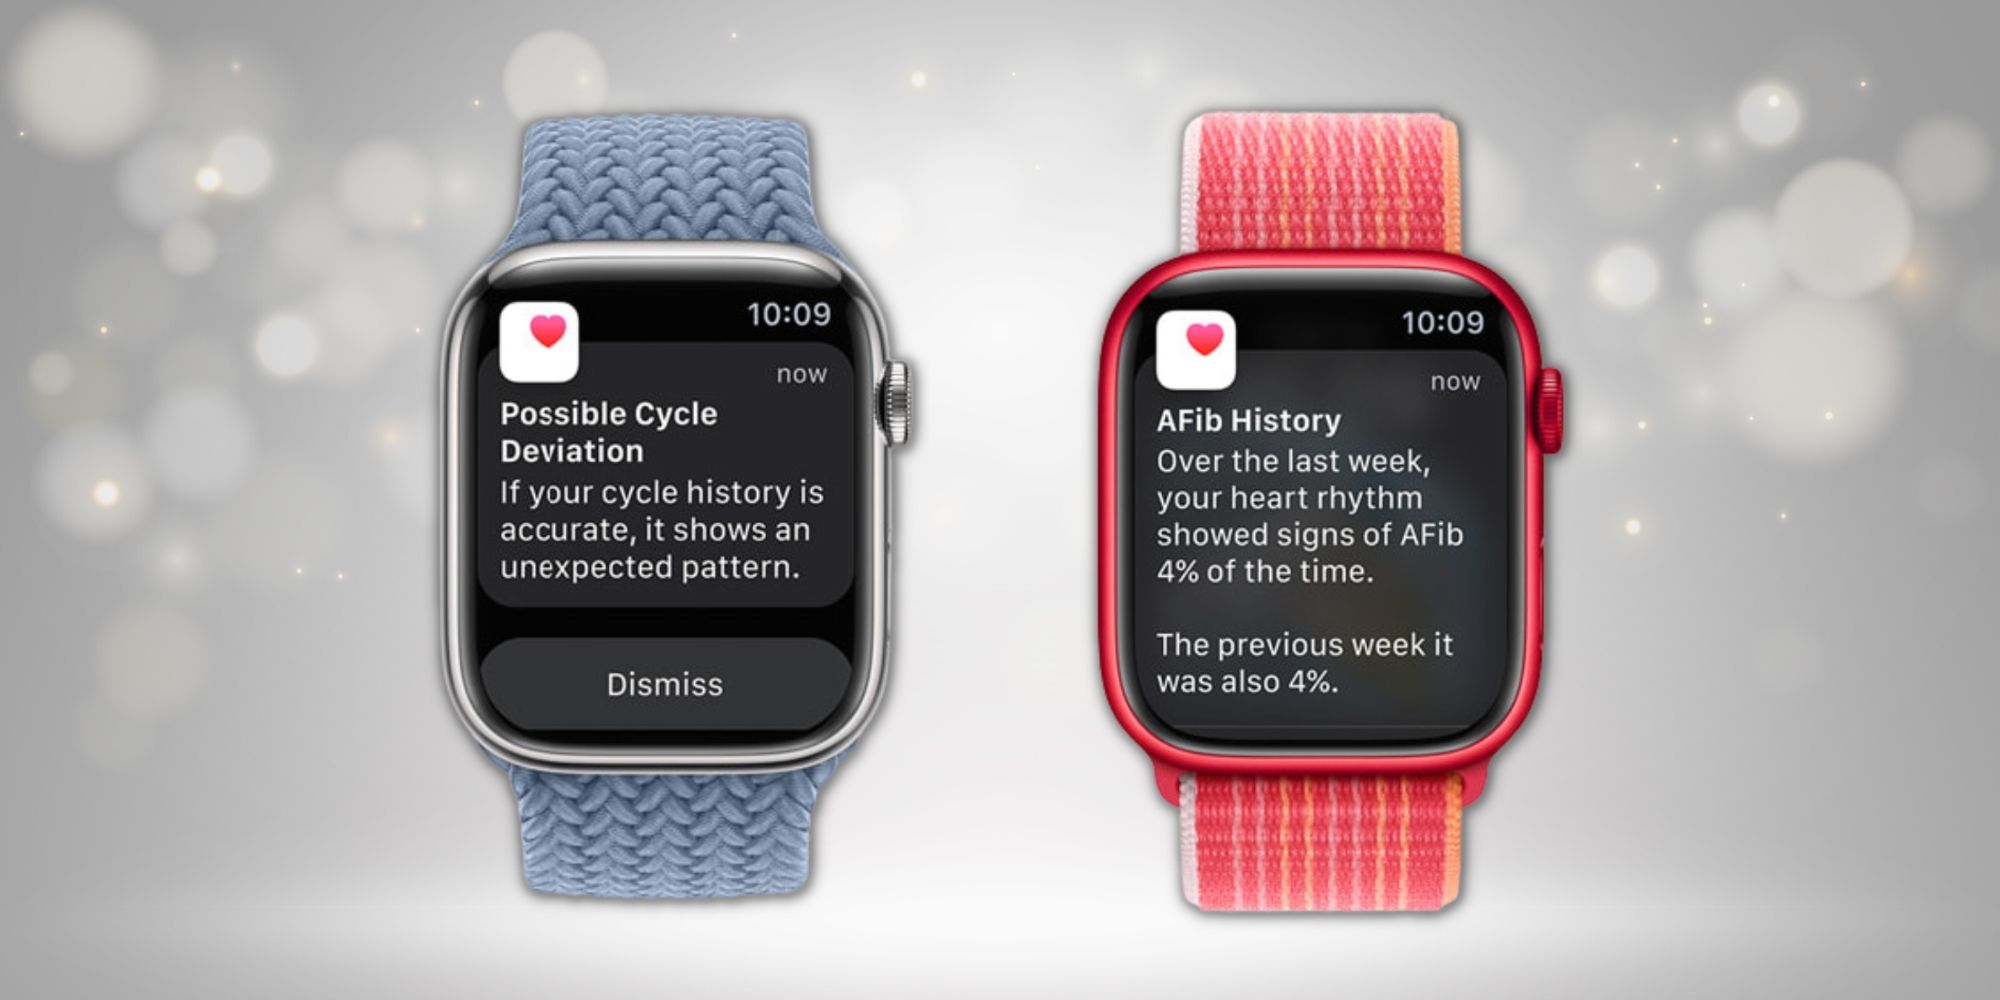 Apple Watch Series 8 with cycle deviation and AFib detection features